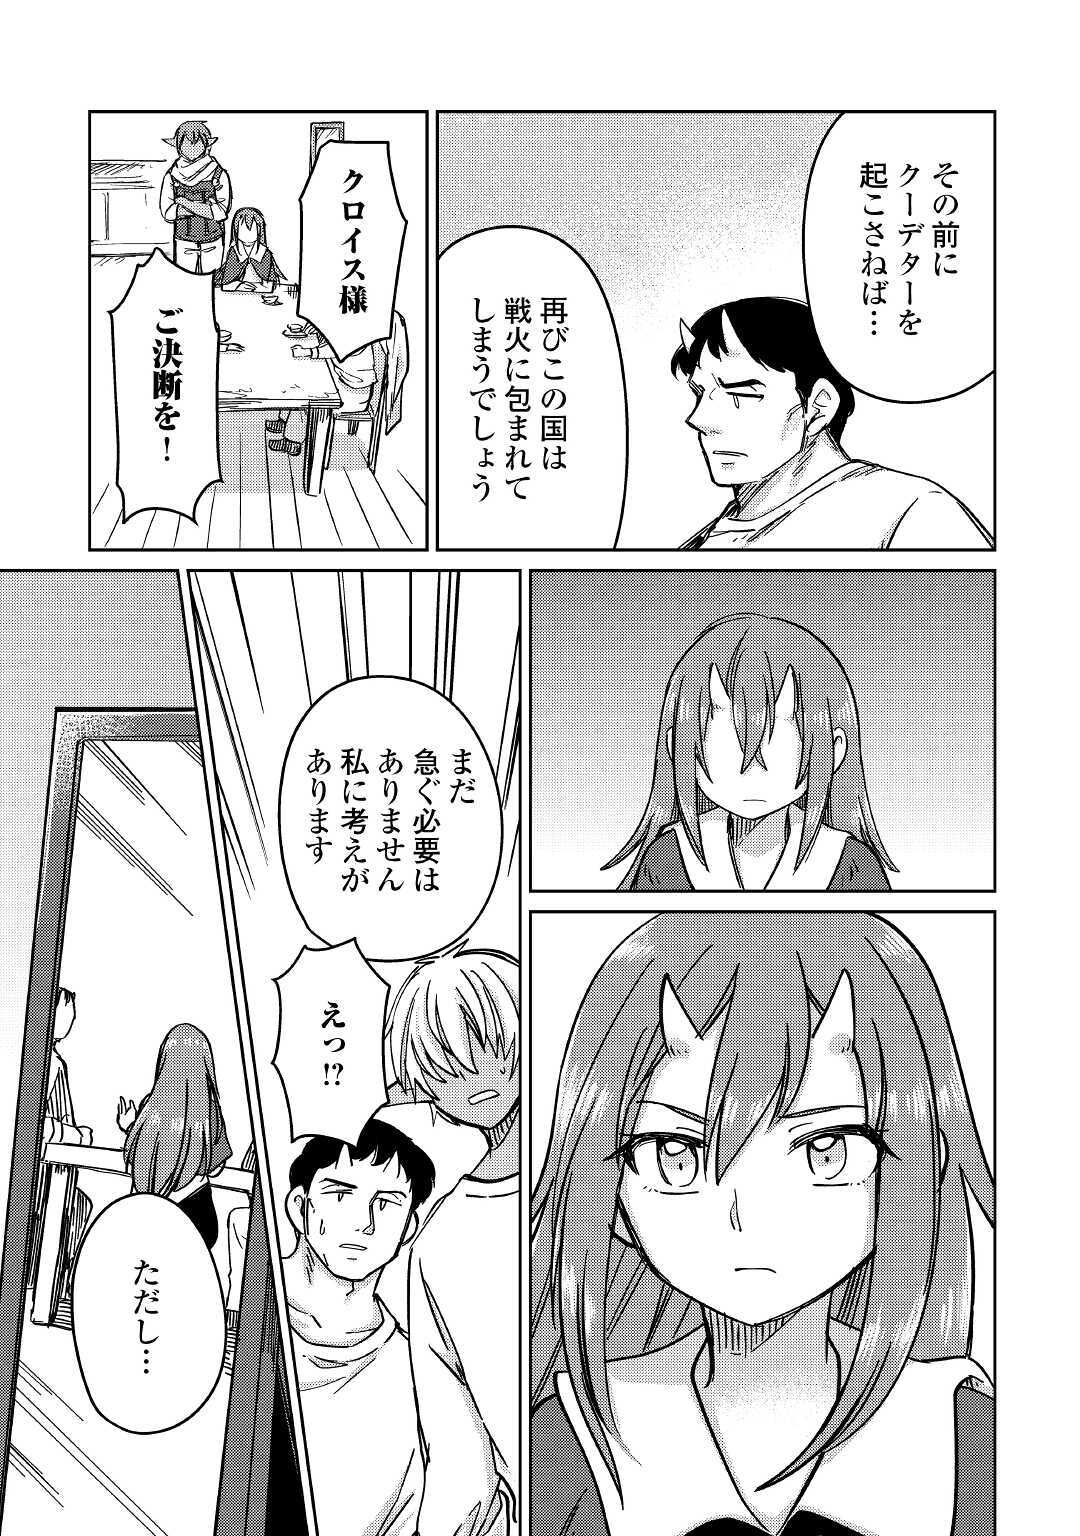 The Former Structural Researcher’s Story of Otherworldly Adventure 第30話 - Page 19